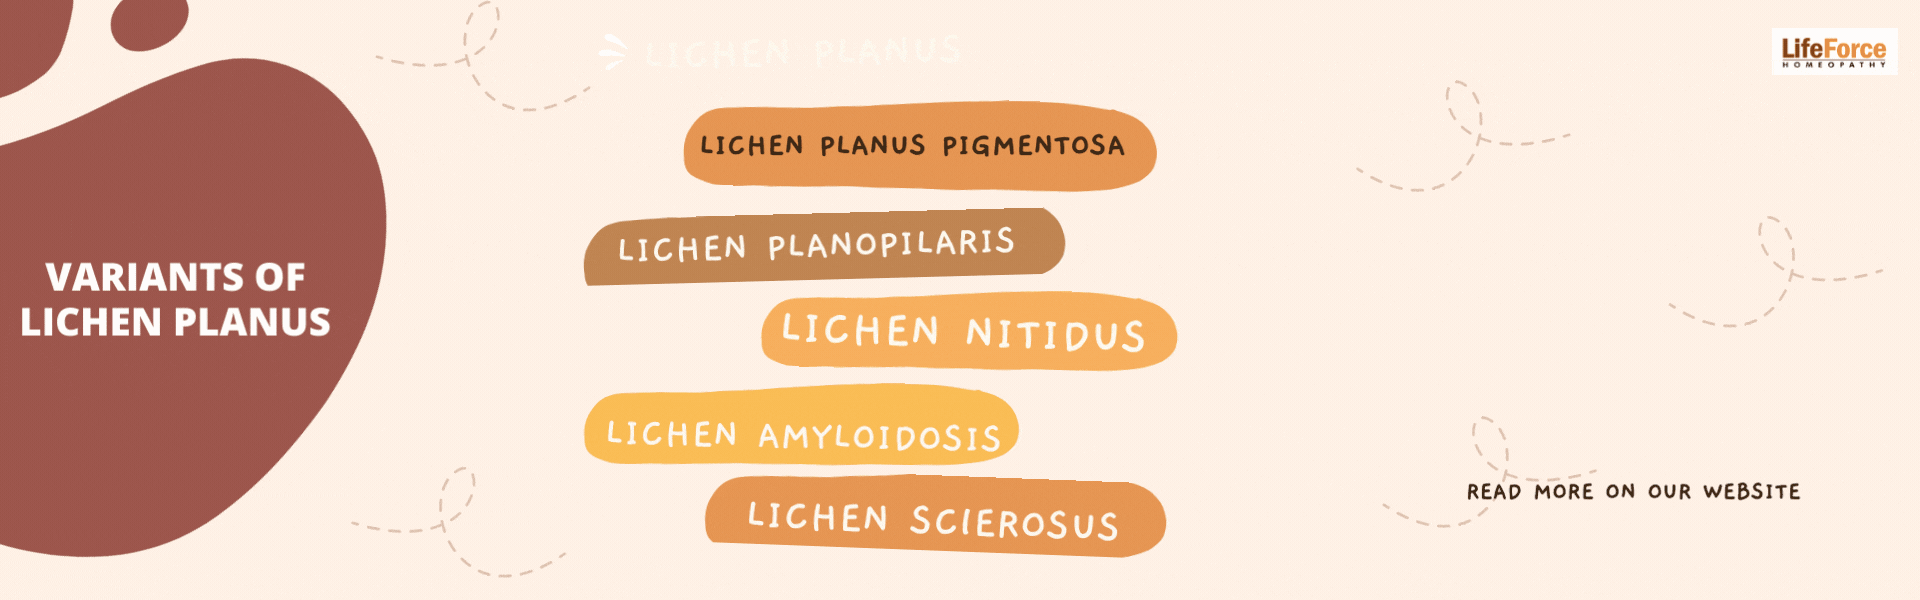 Variants or types of Lichen Planus 